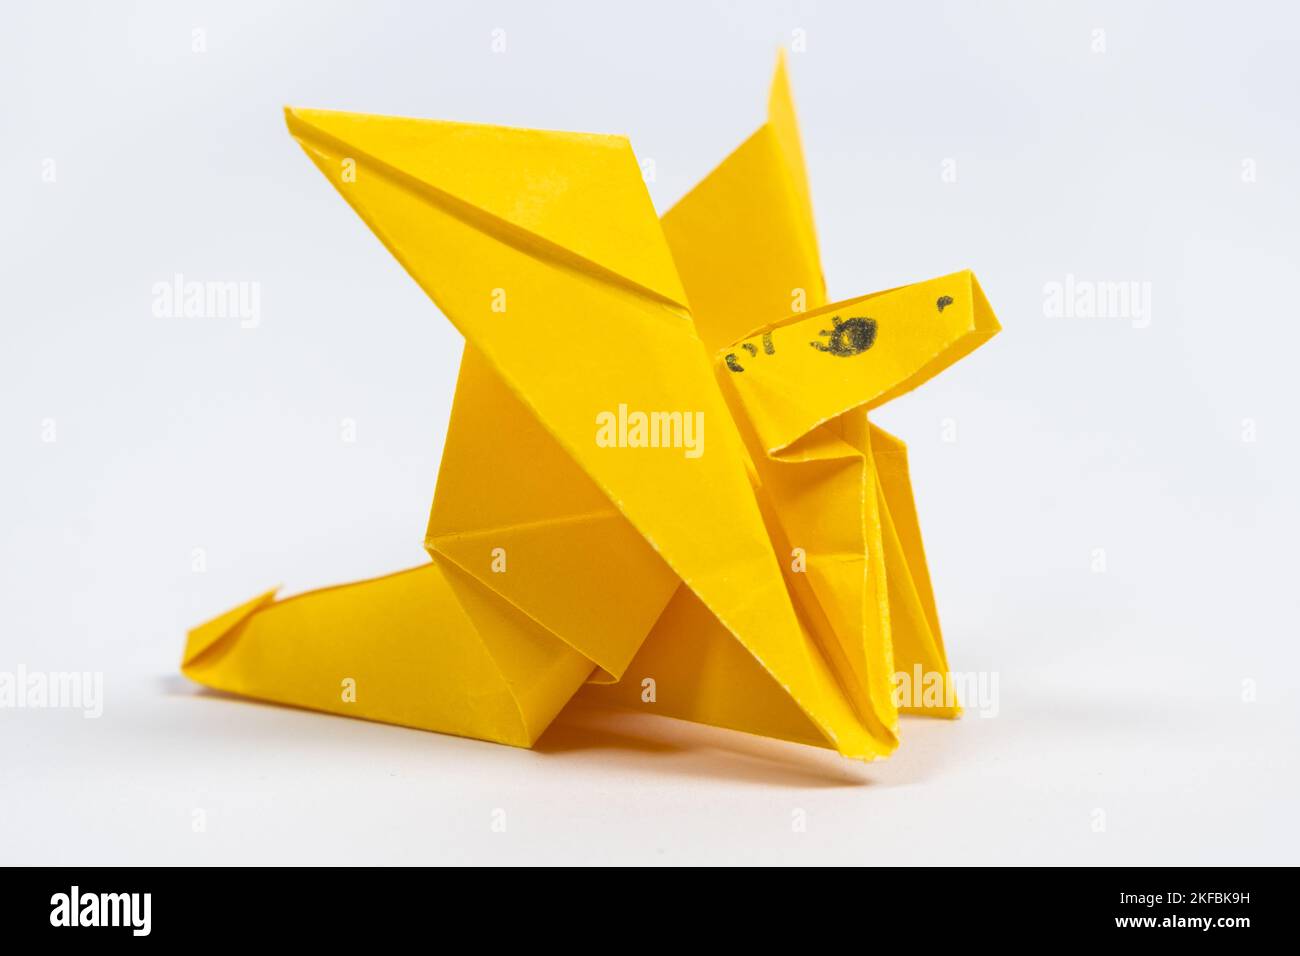 Origami yellow cute dragon, a paper animal figurine on a white background Stock Photo